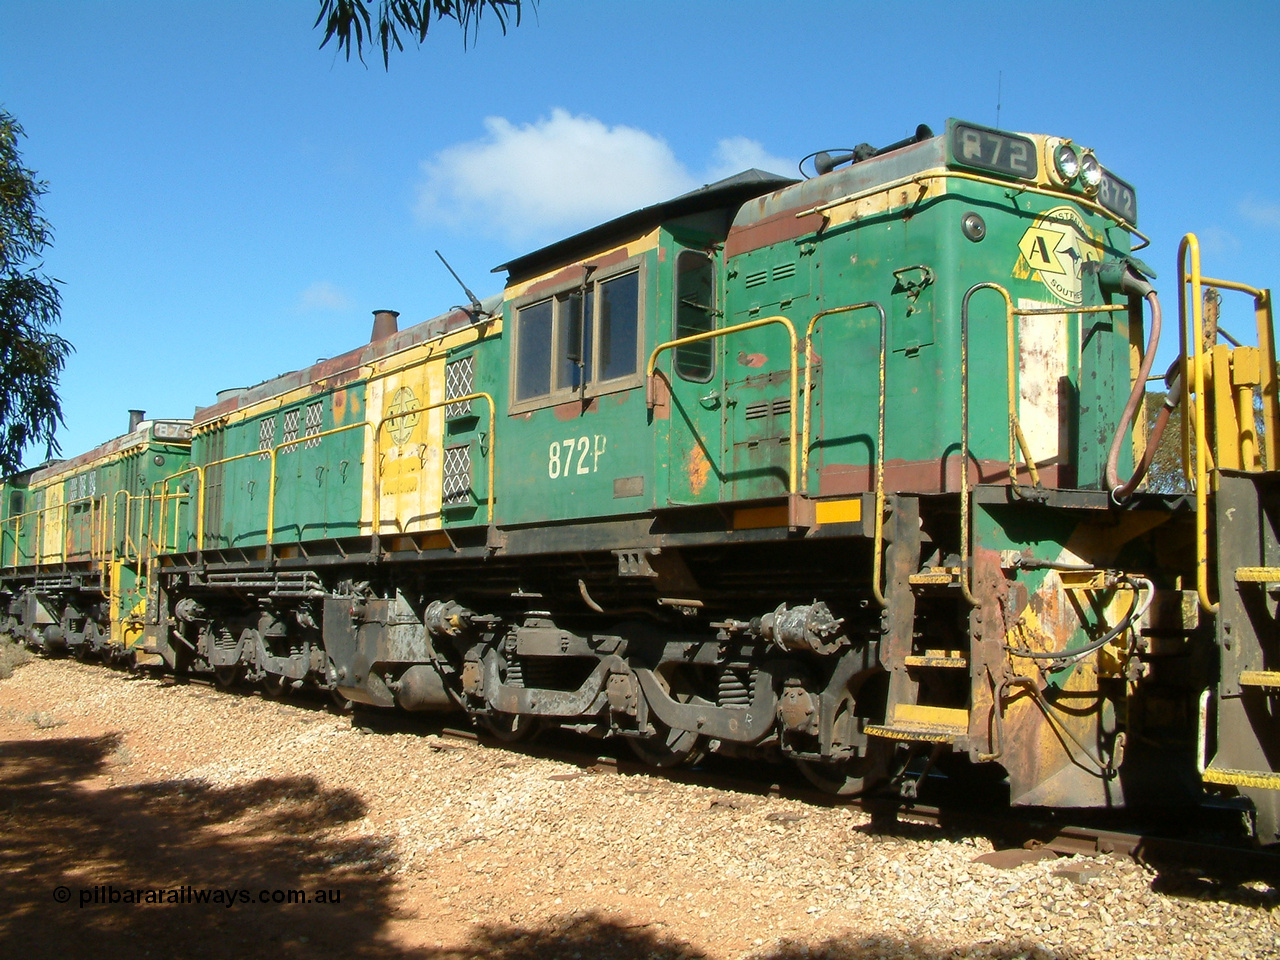 030411 101932
Kimba Grain Bunker, ALCo DL531 model built by AE Goodwin NSW as 830 class 872 serial G3422-2, issued to Eyre Peninsula from new in March 1966, 11th April 2003. [url=https://goo.gl/maps/Et8bgaqpMnn]Geodata here[/url].
Keywords: 830-class;872;G3422-2;AE-Goodwin;ALCo;DL531;